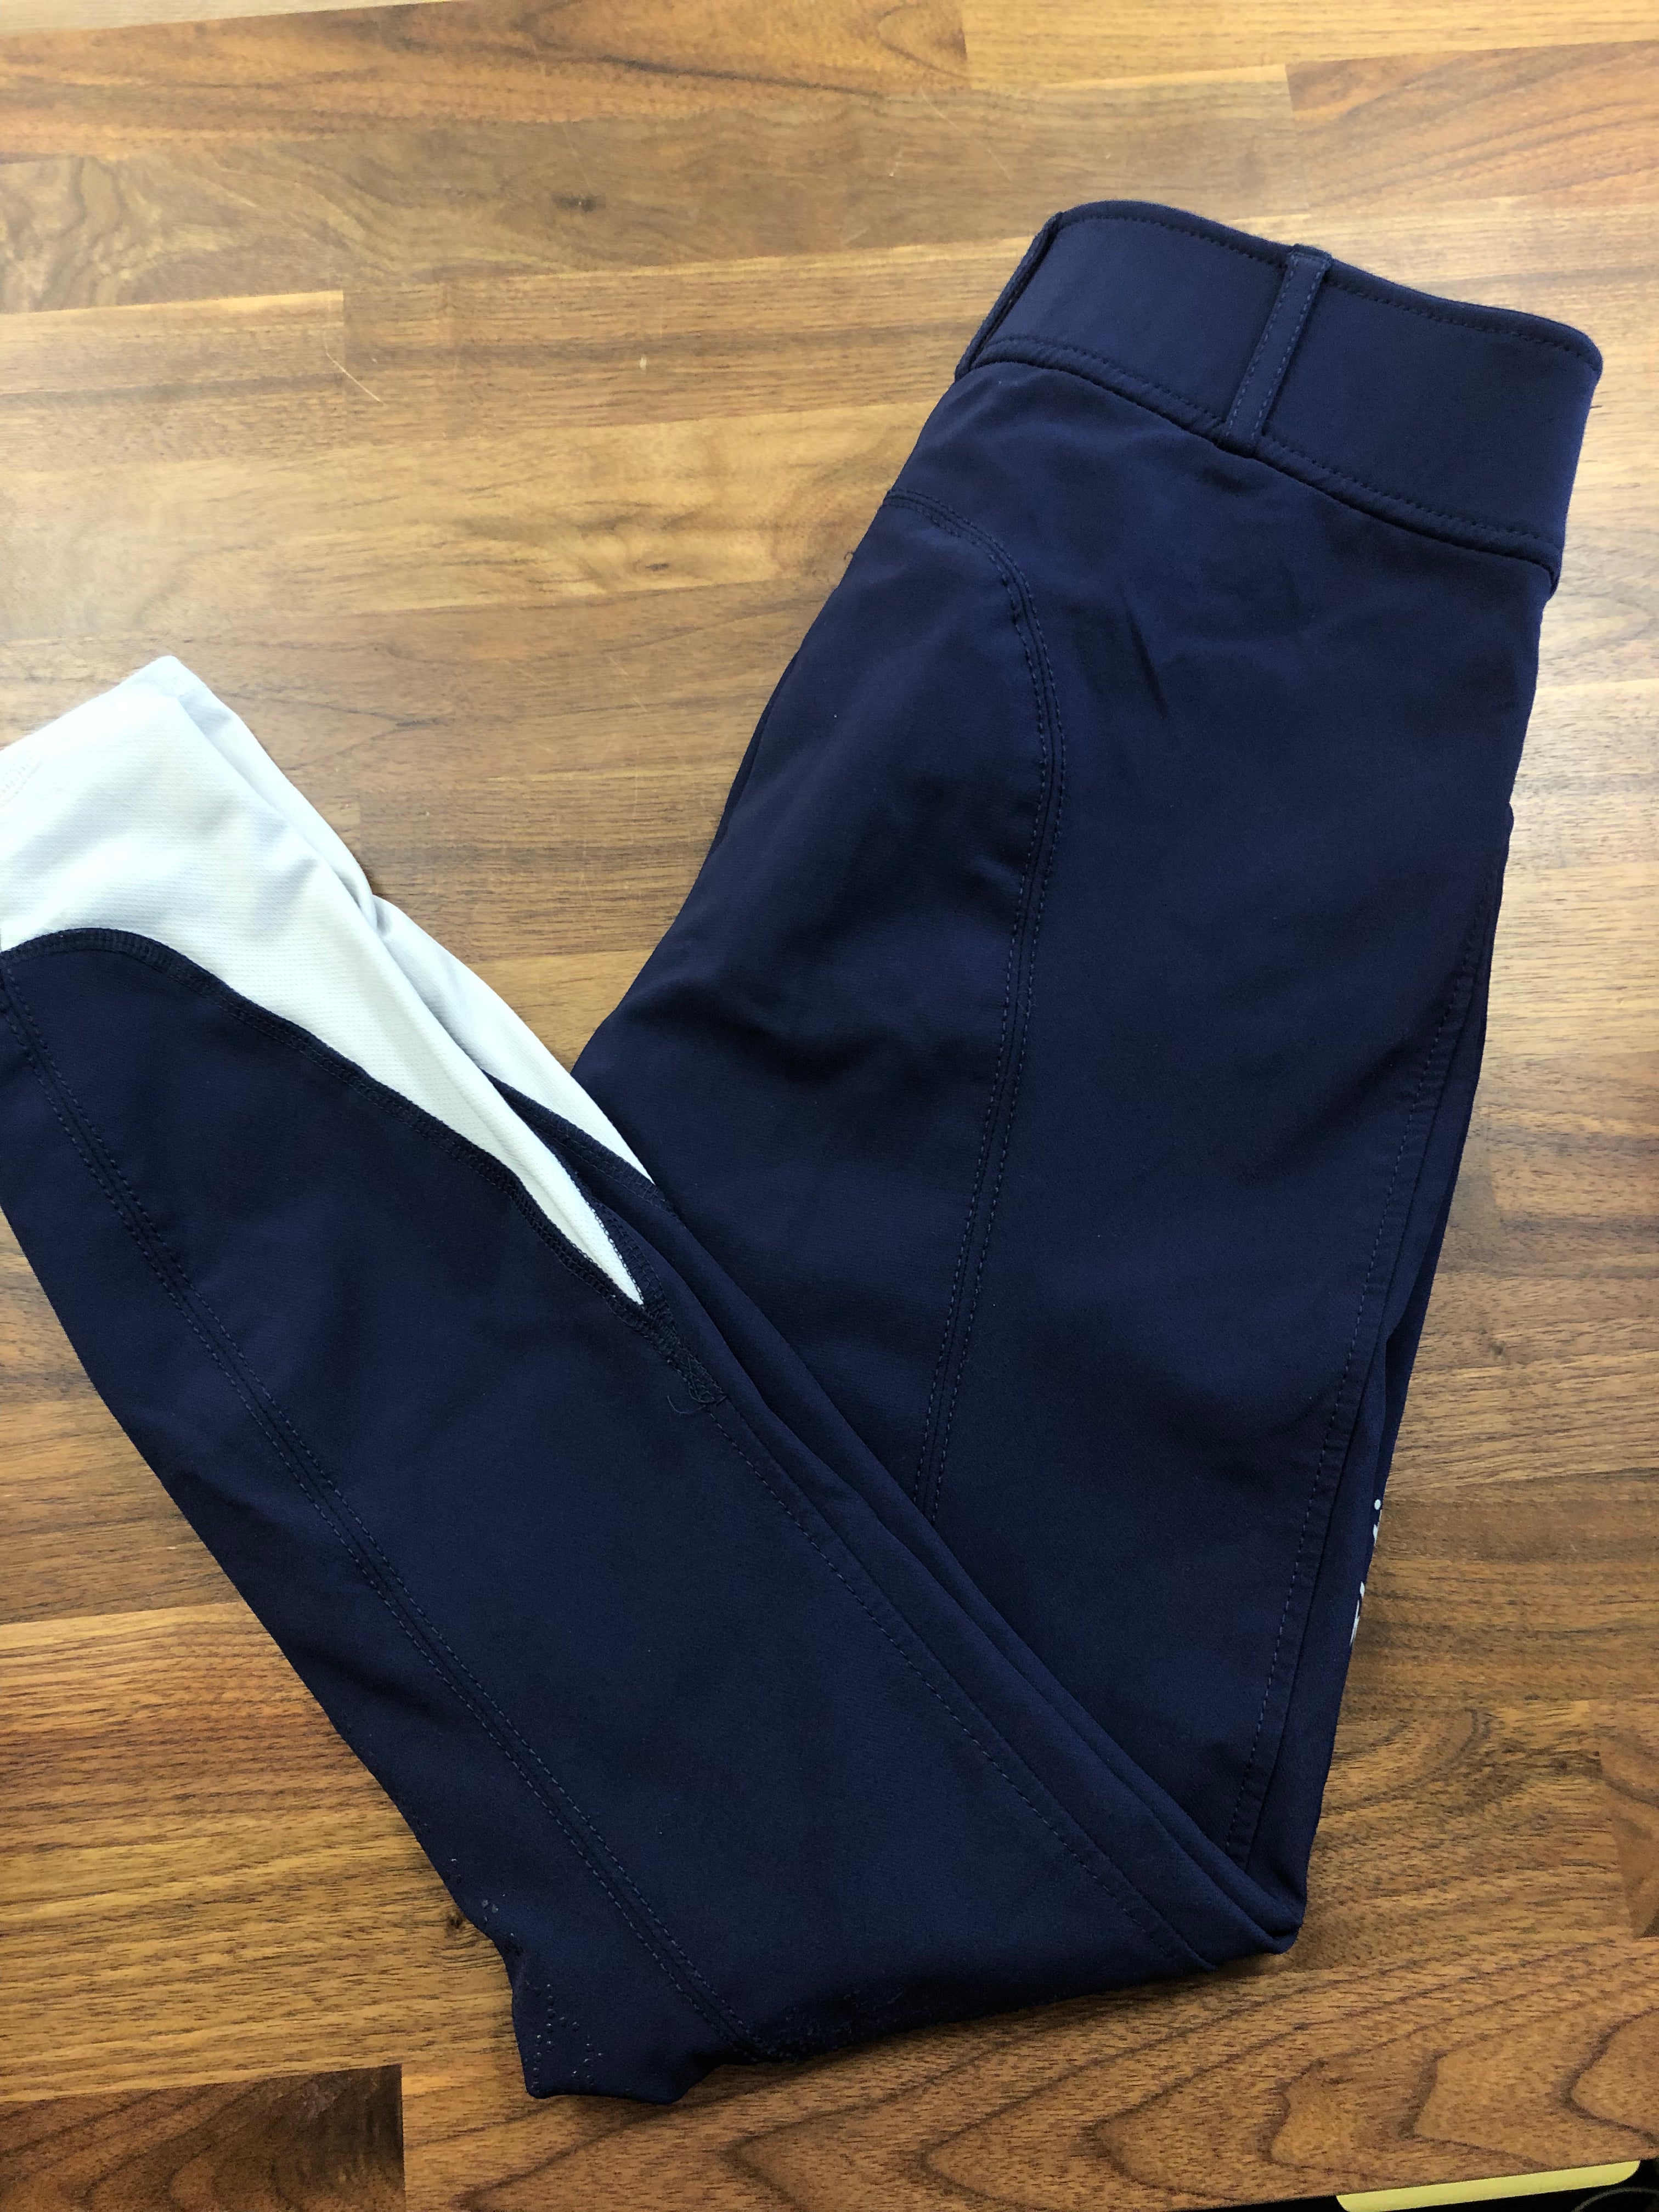 Fine Used Navy Elation Silicone Knee Patch Breeches - 26R